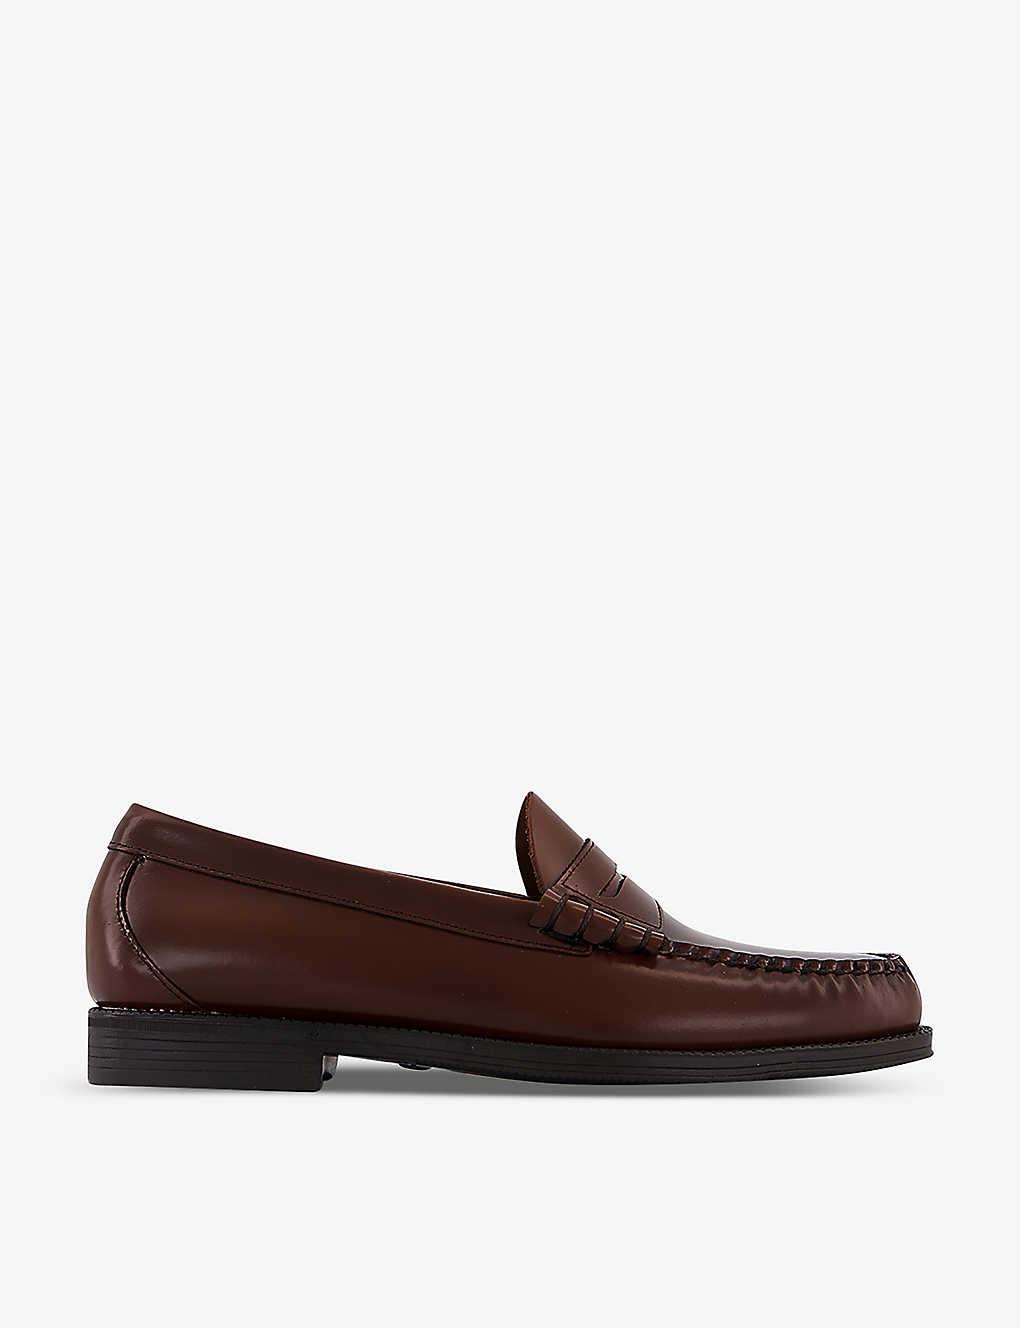 G.H. Bass & Co. Weejuns Larson Leather Penny Loafer in Brown for Men ...